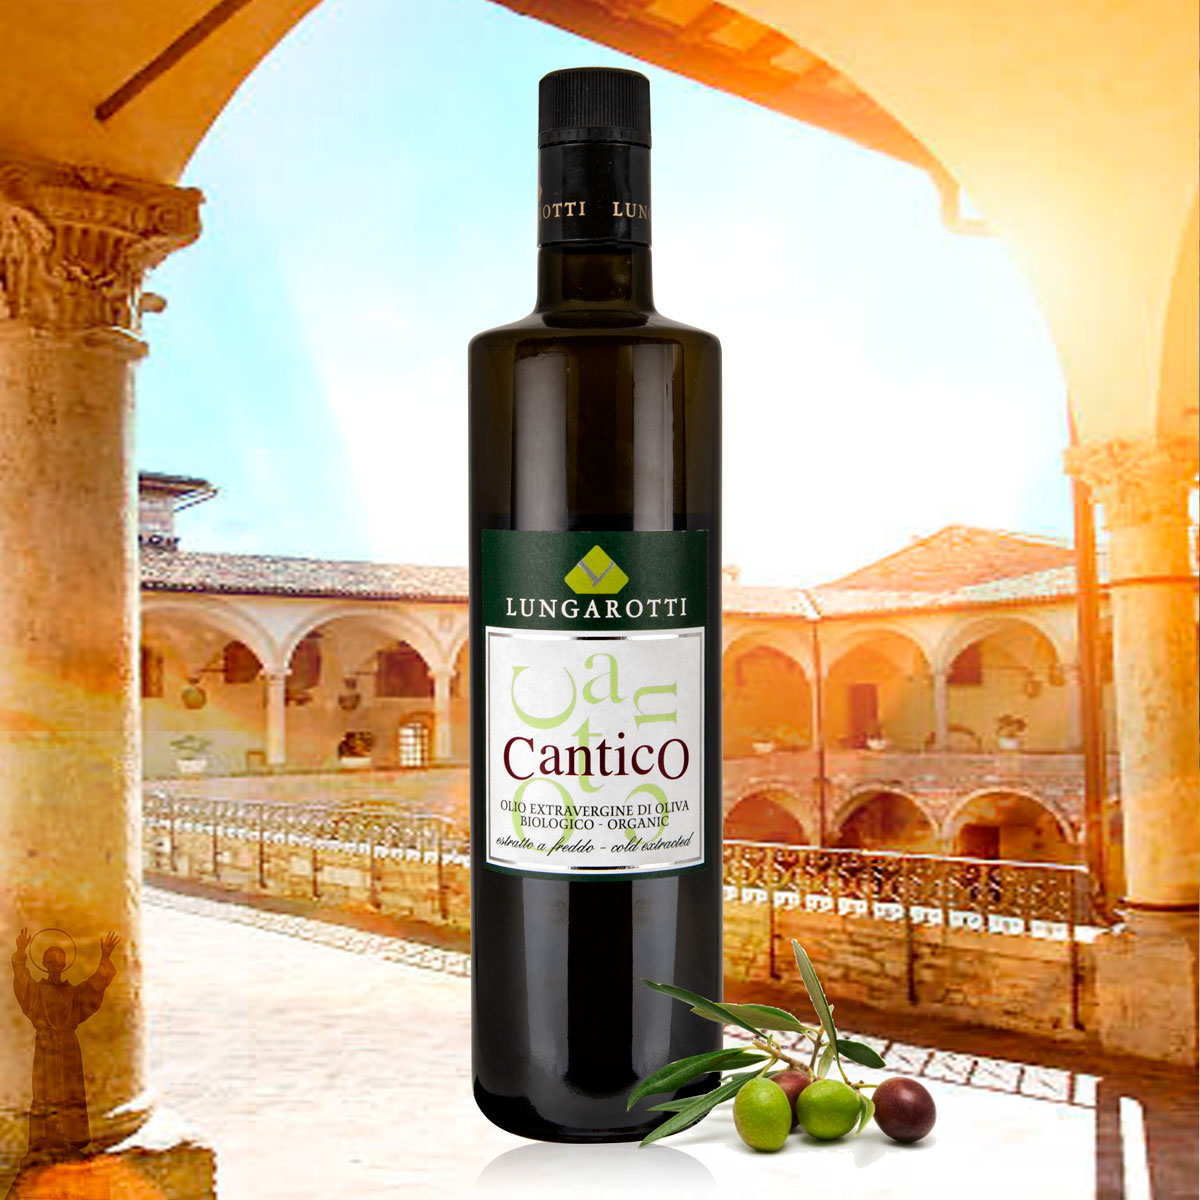 Cantico Extra Virgin Olive Oil 'The expression of Umbria' Organic Biologico